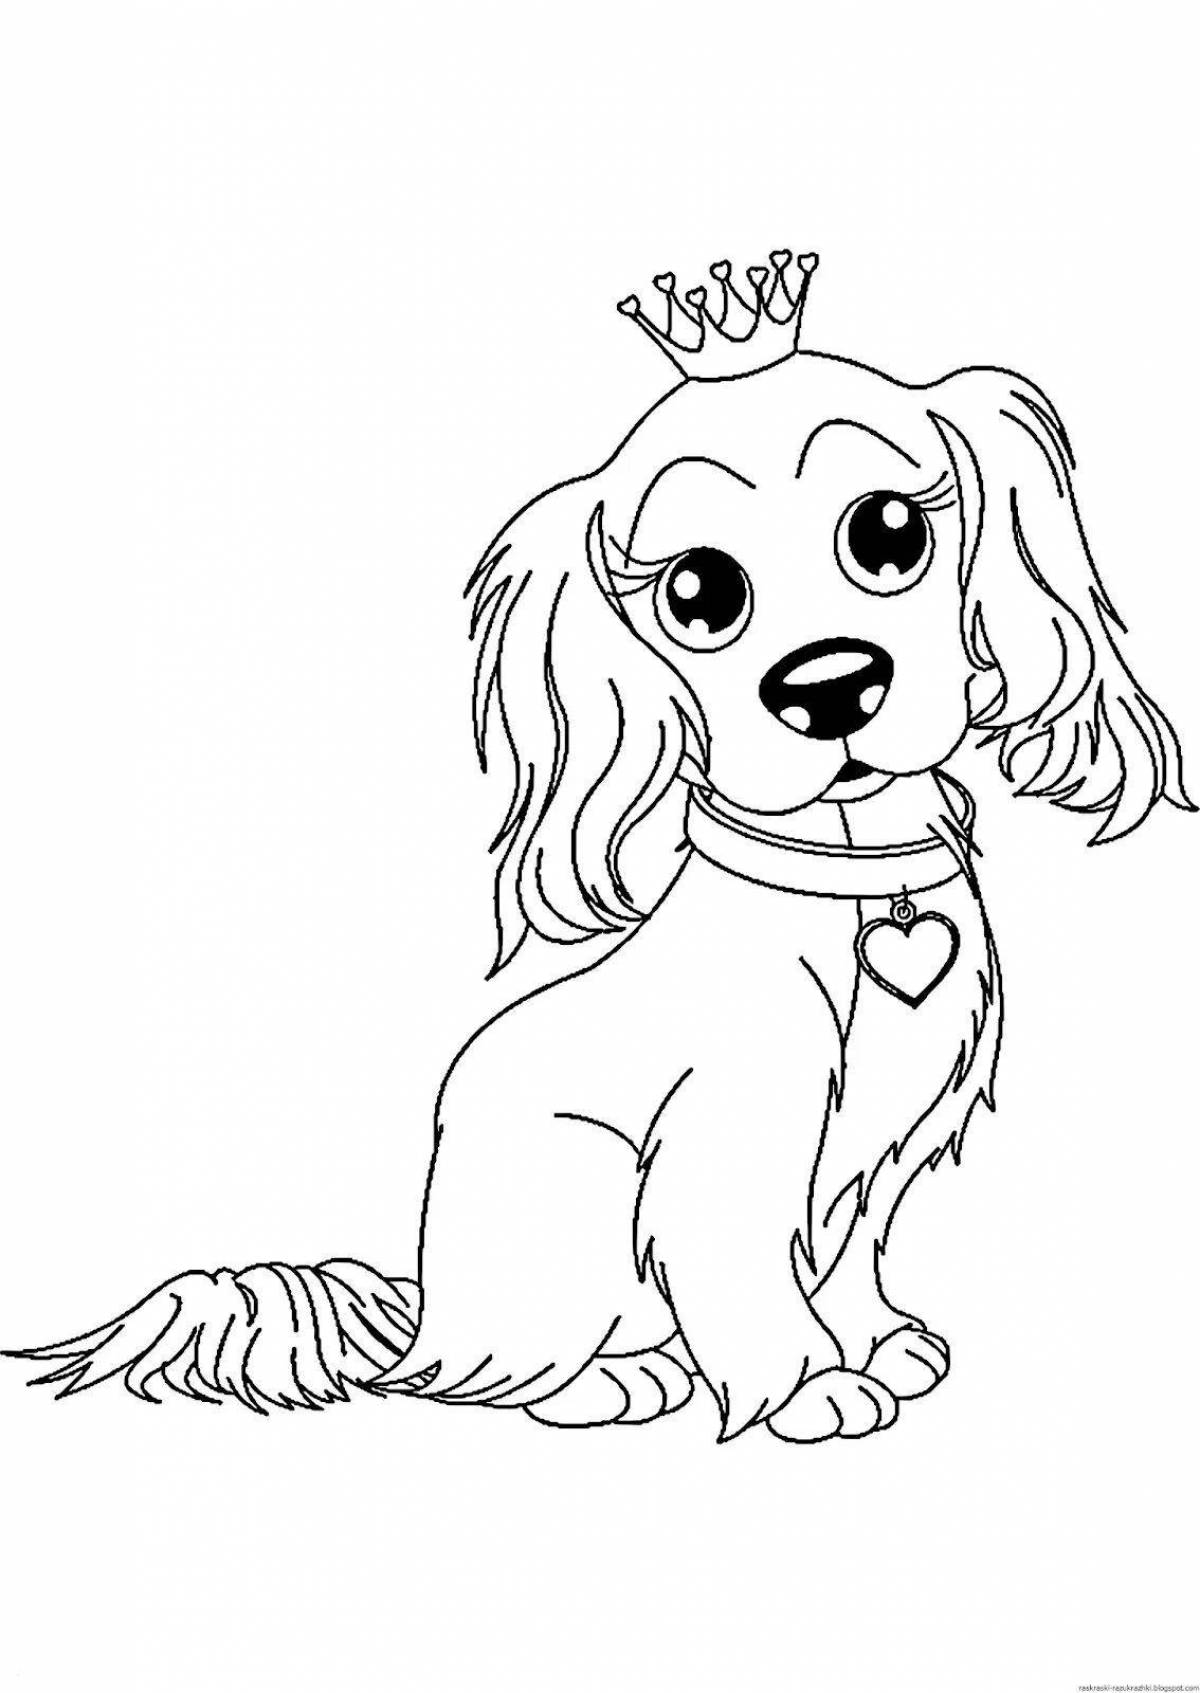 Dog friendly coloring book for kids 7-8 years old